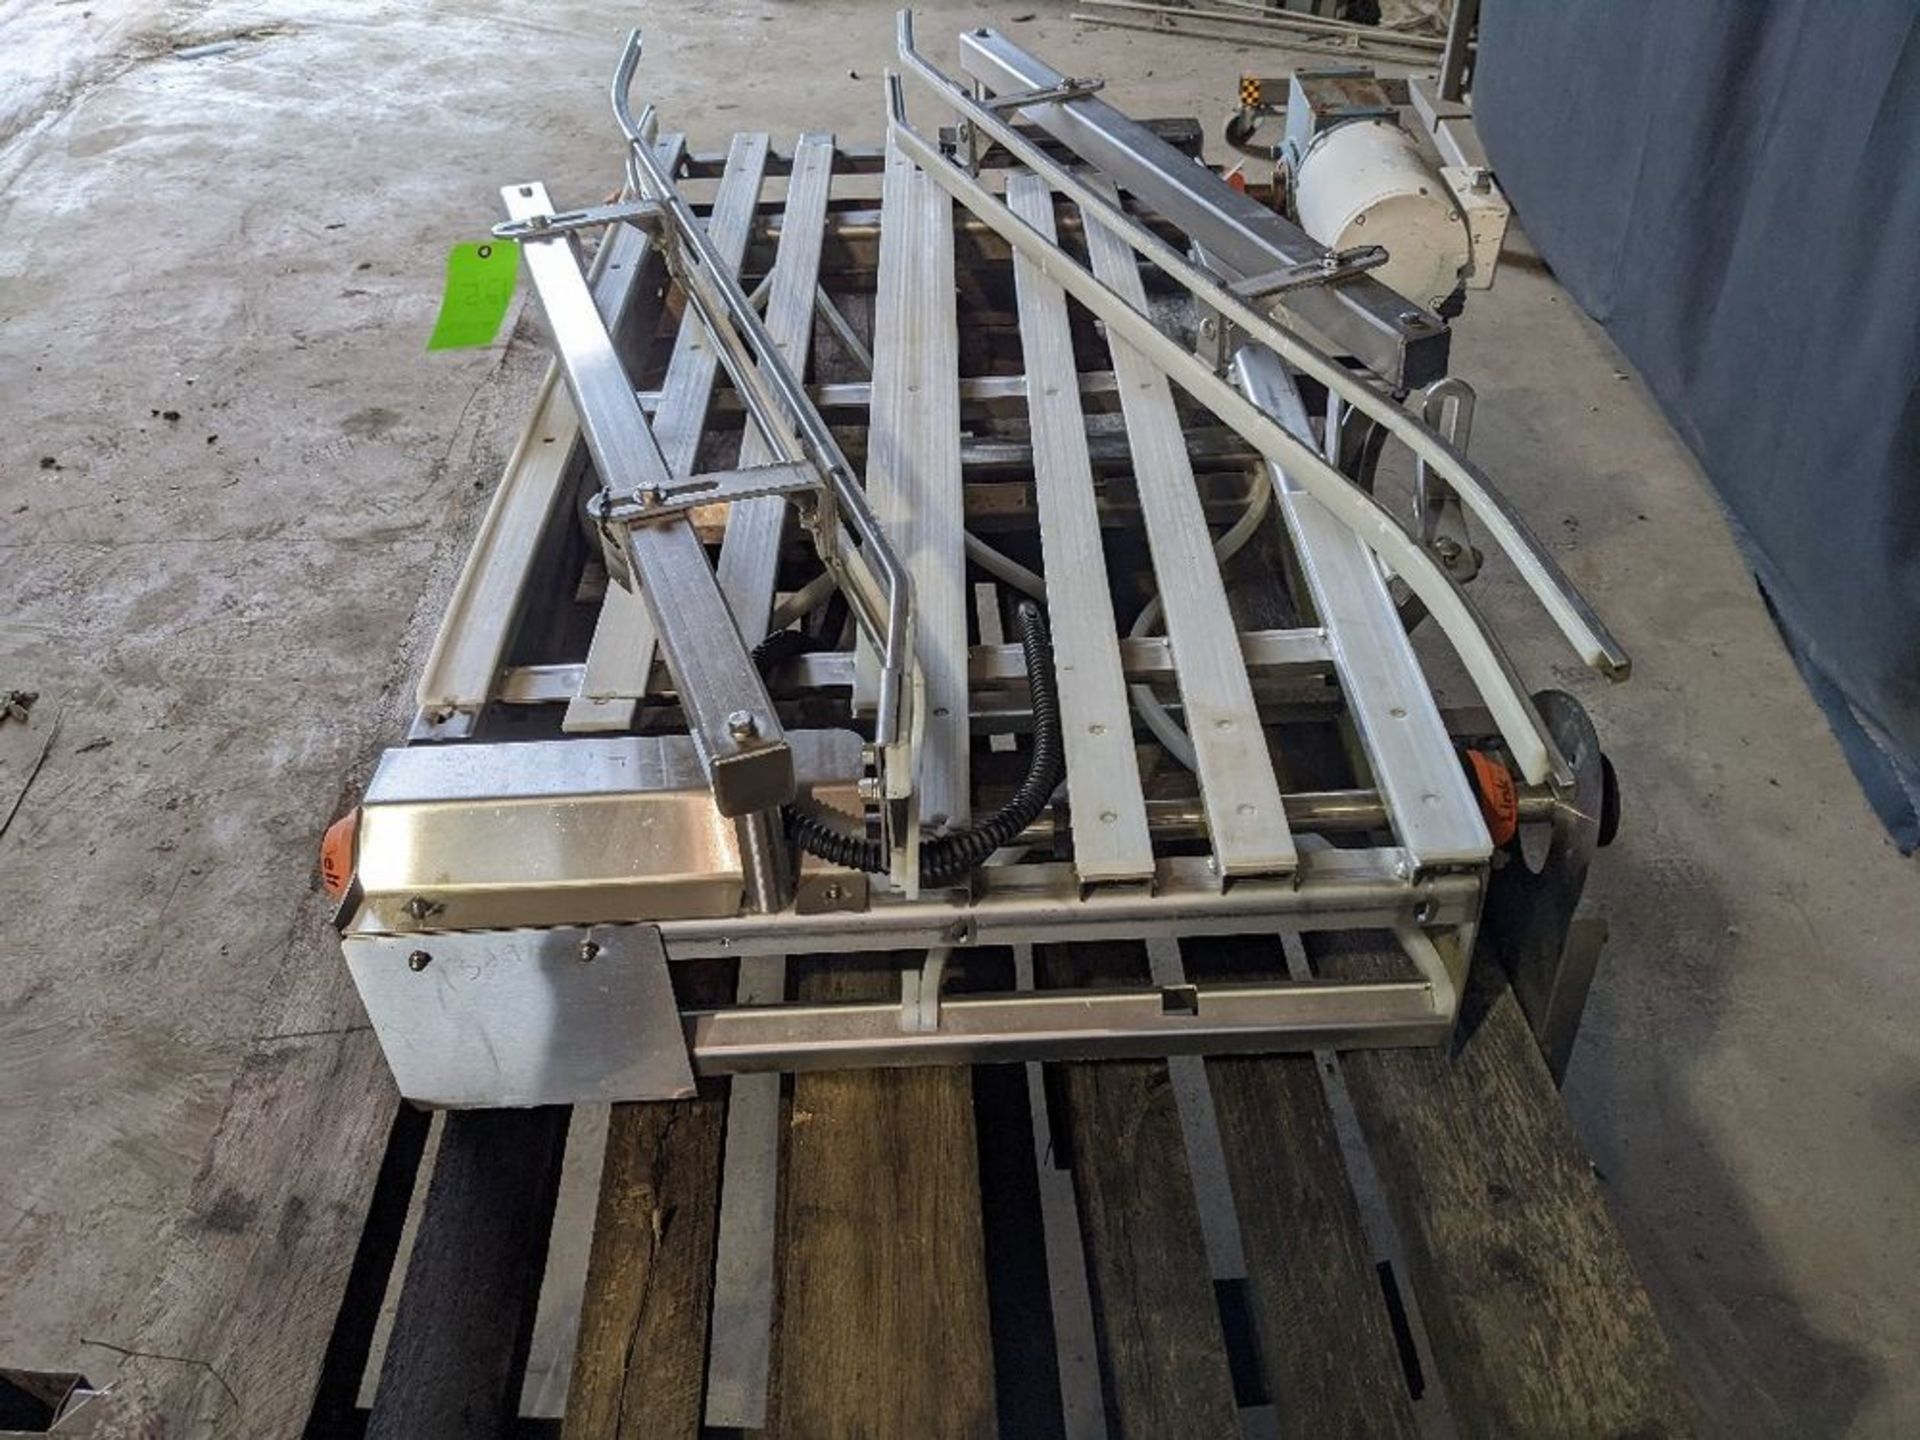 Qty (1) 15" Wide Sentry Matt Top Conveyor - 60"L Conveyor w/ Right to Left Side Shift - Realiance - Image 5 of 6